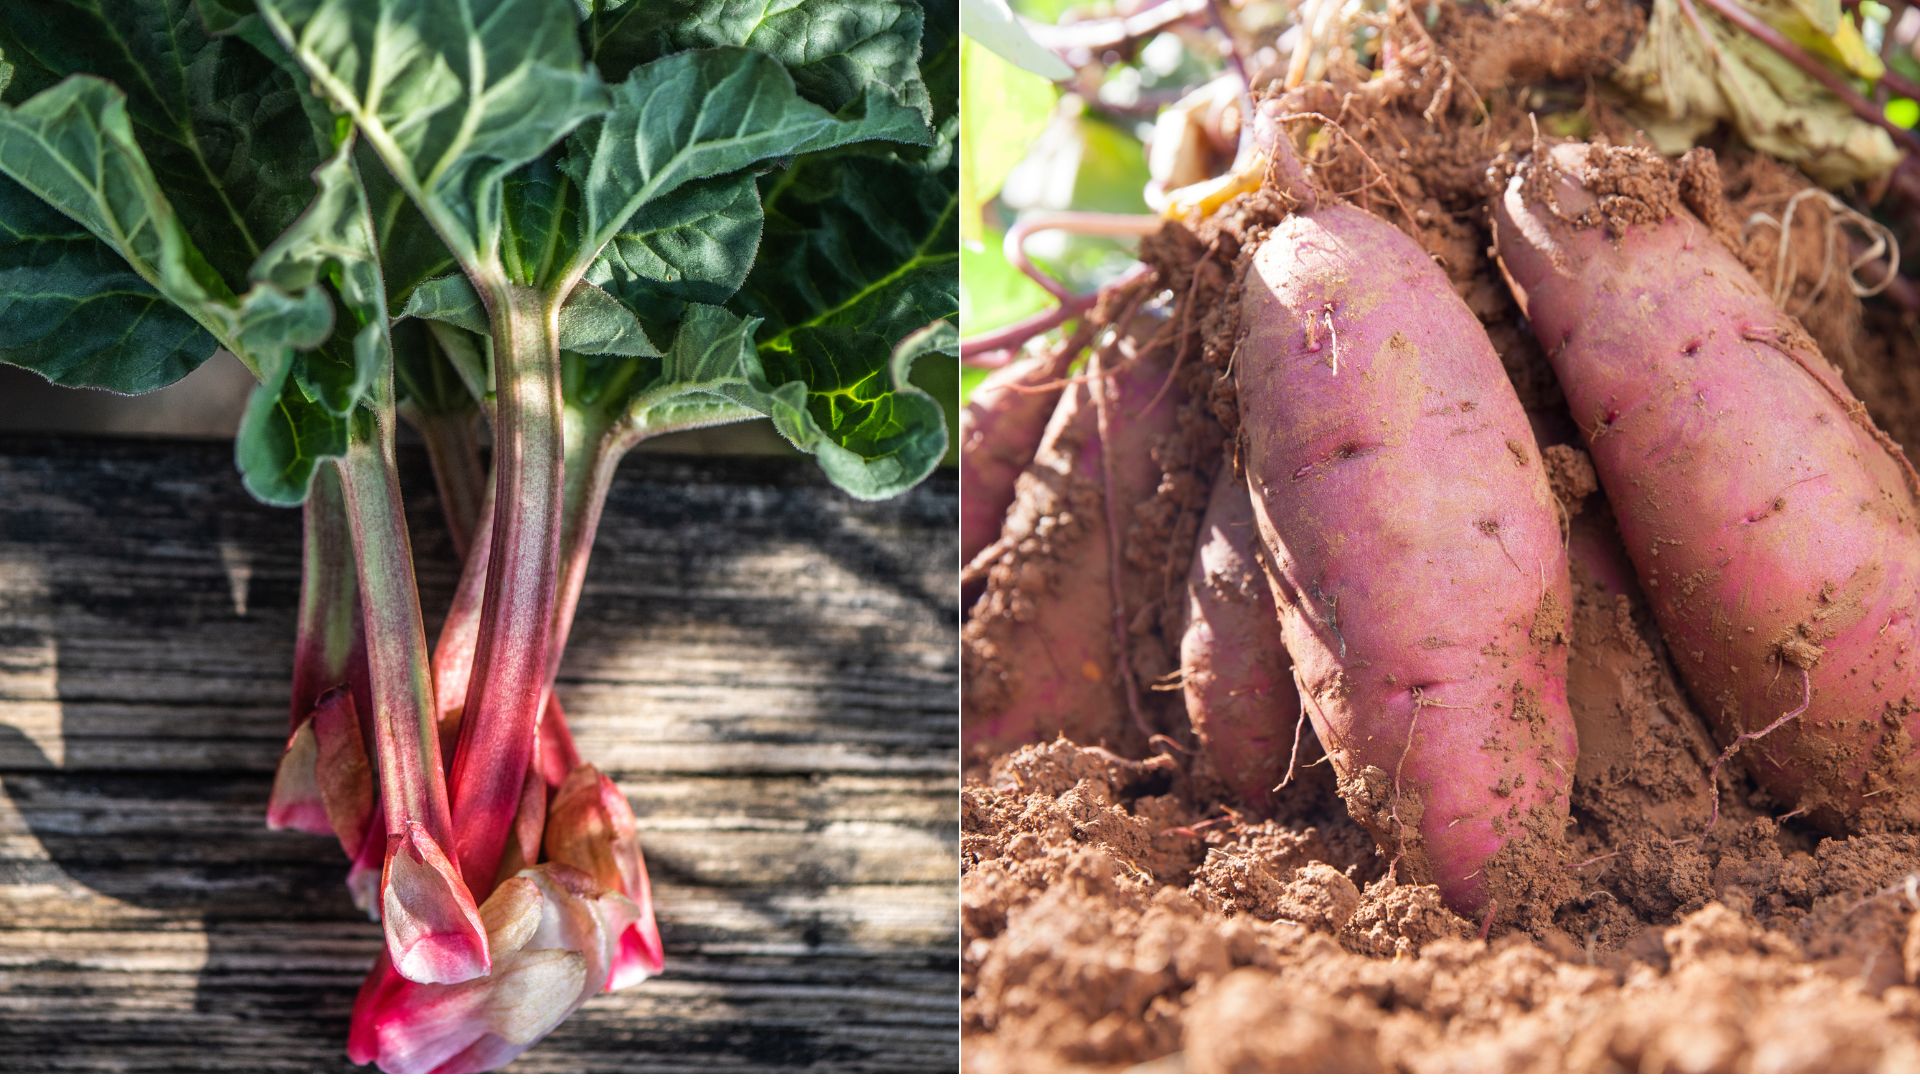 6 Veggies You Shouldn’t Grow In Raised Beds + 7 That Flourish